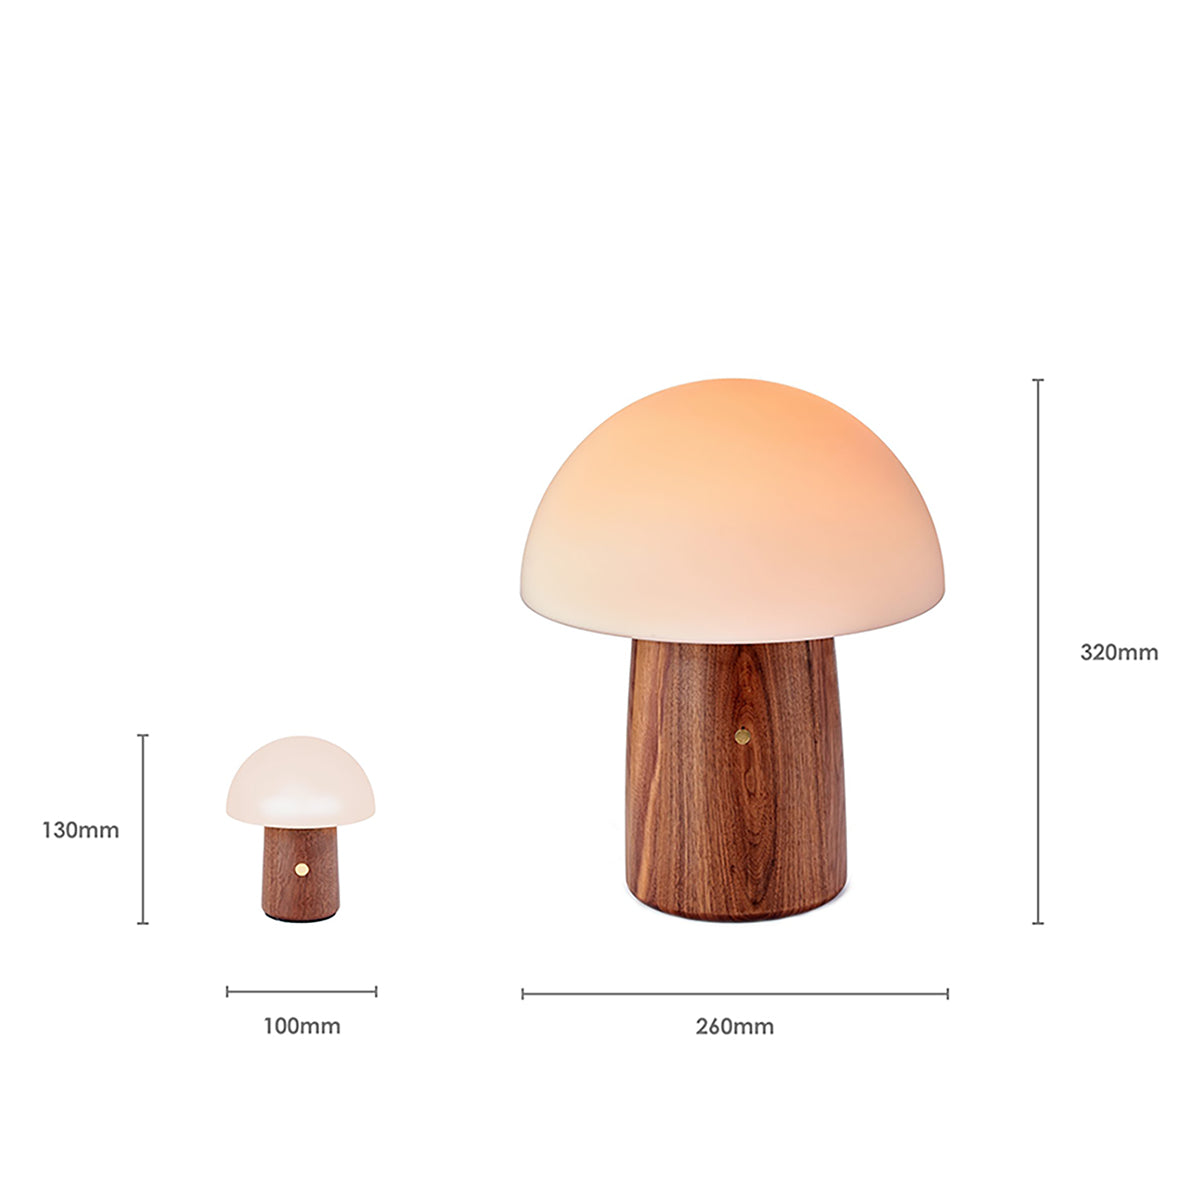 Alice Table Lamp Large - Natural Walnut Wood